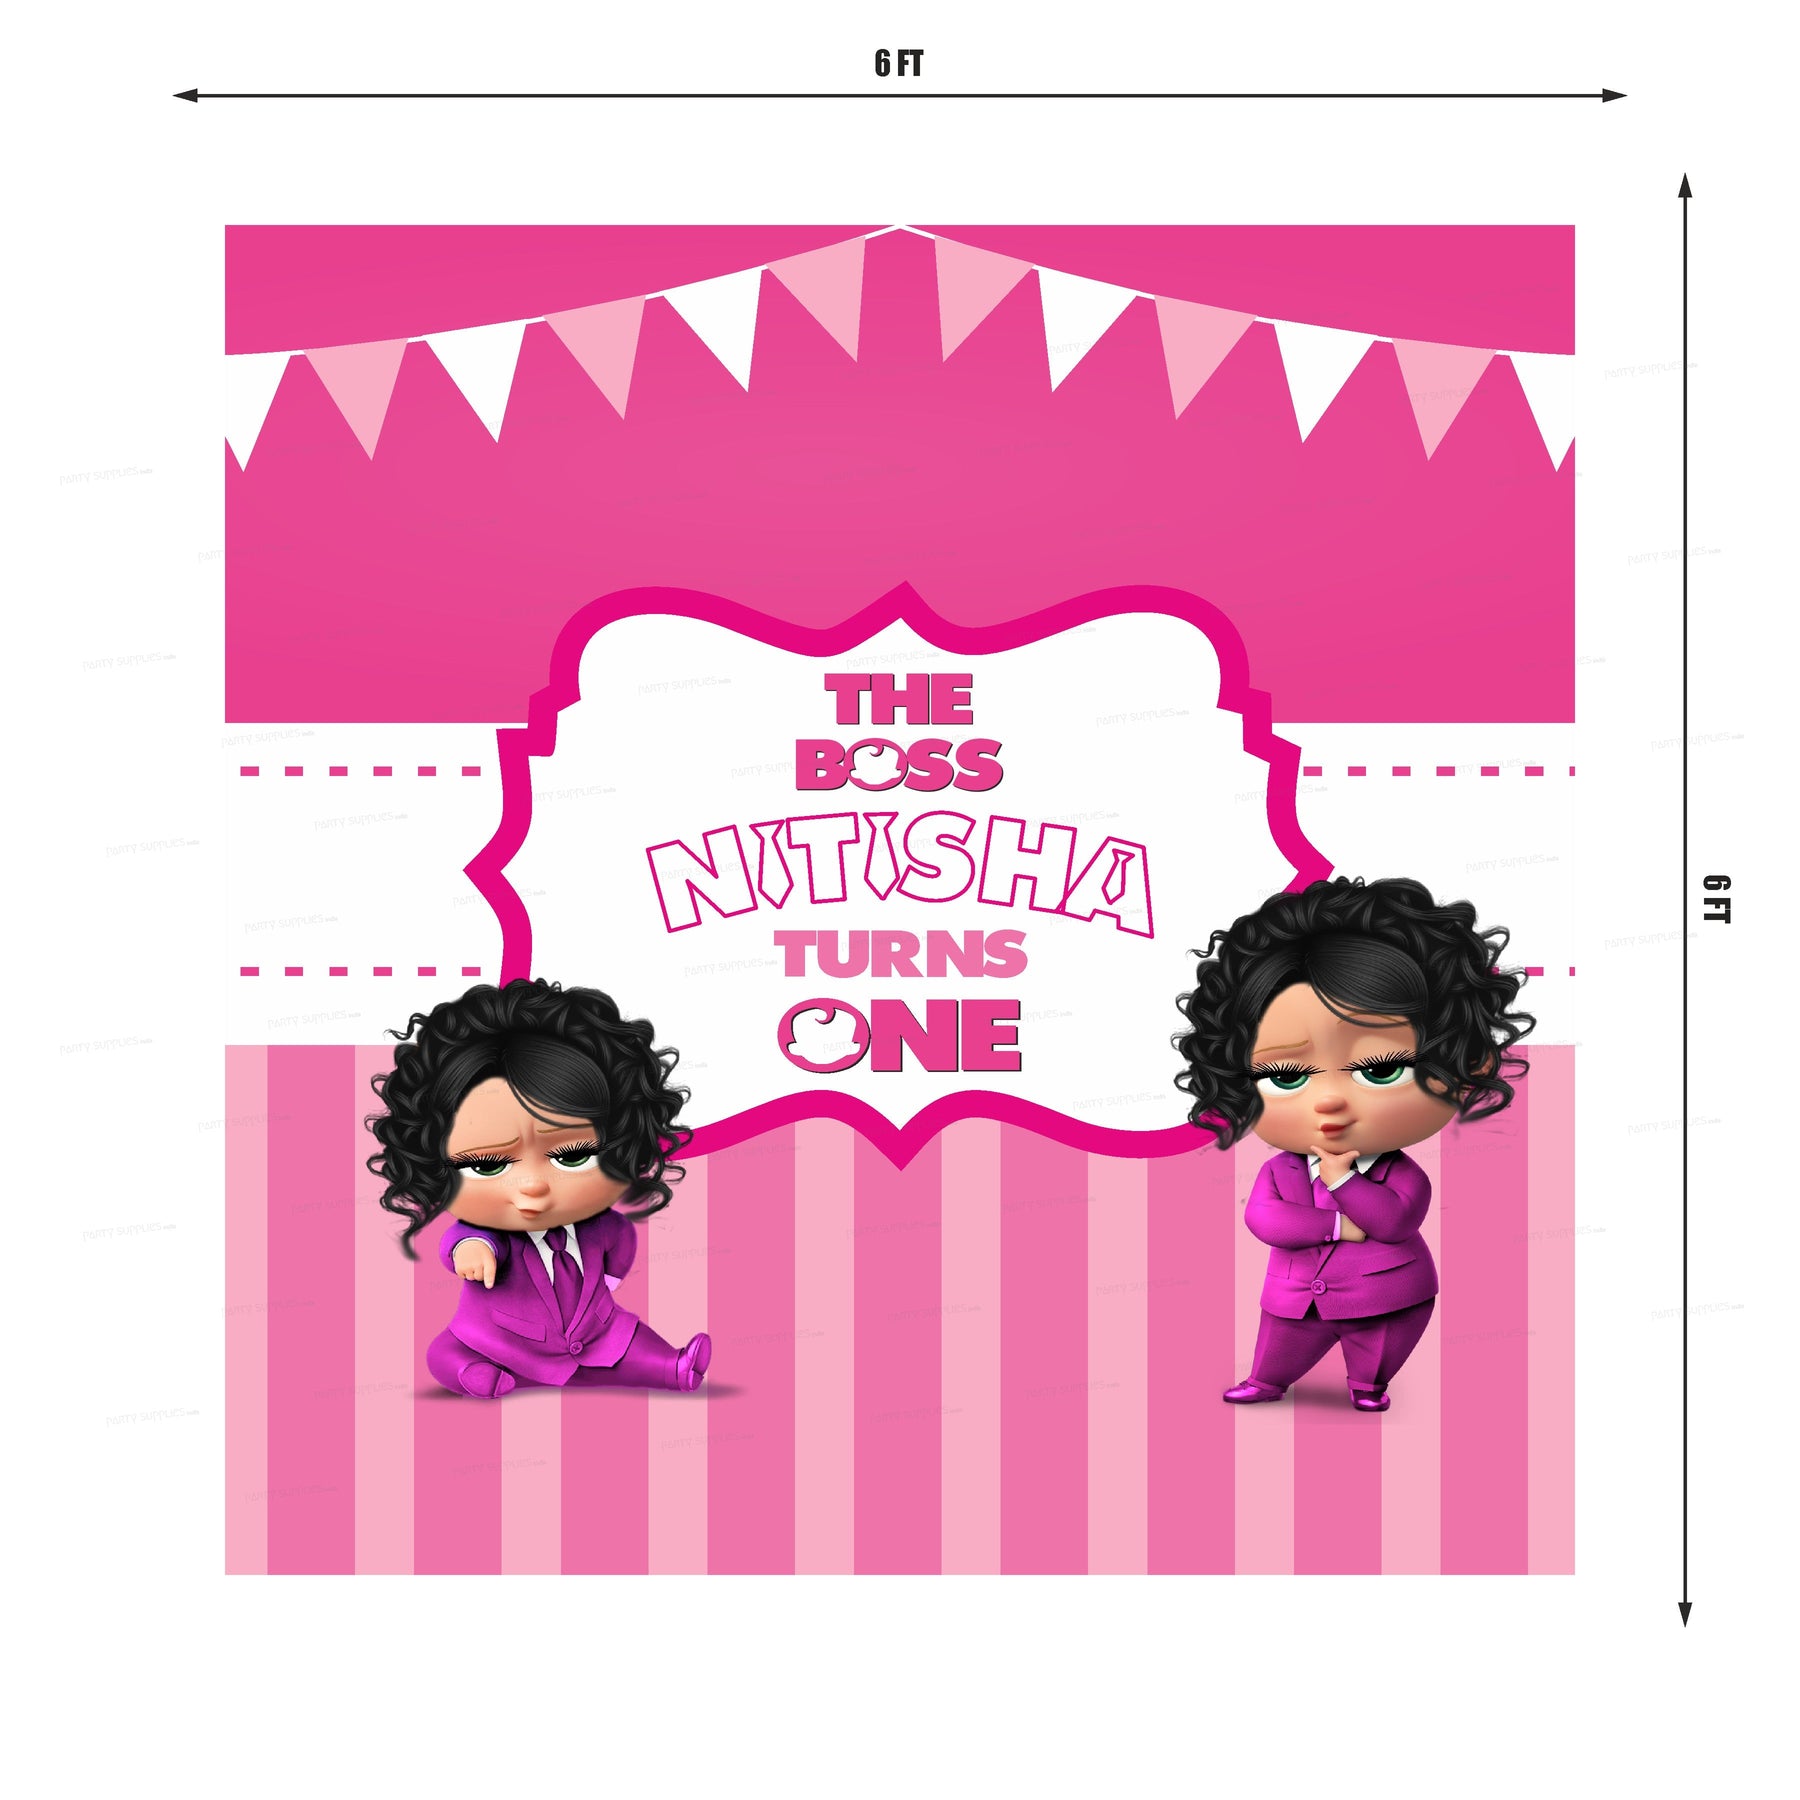 PSI Girl Boss Baby Theme Customized Square Backdrop